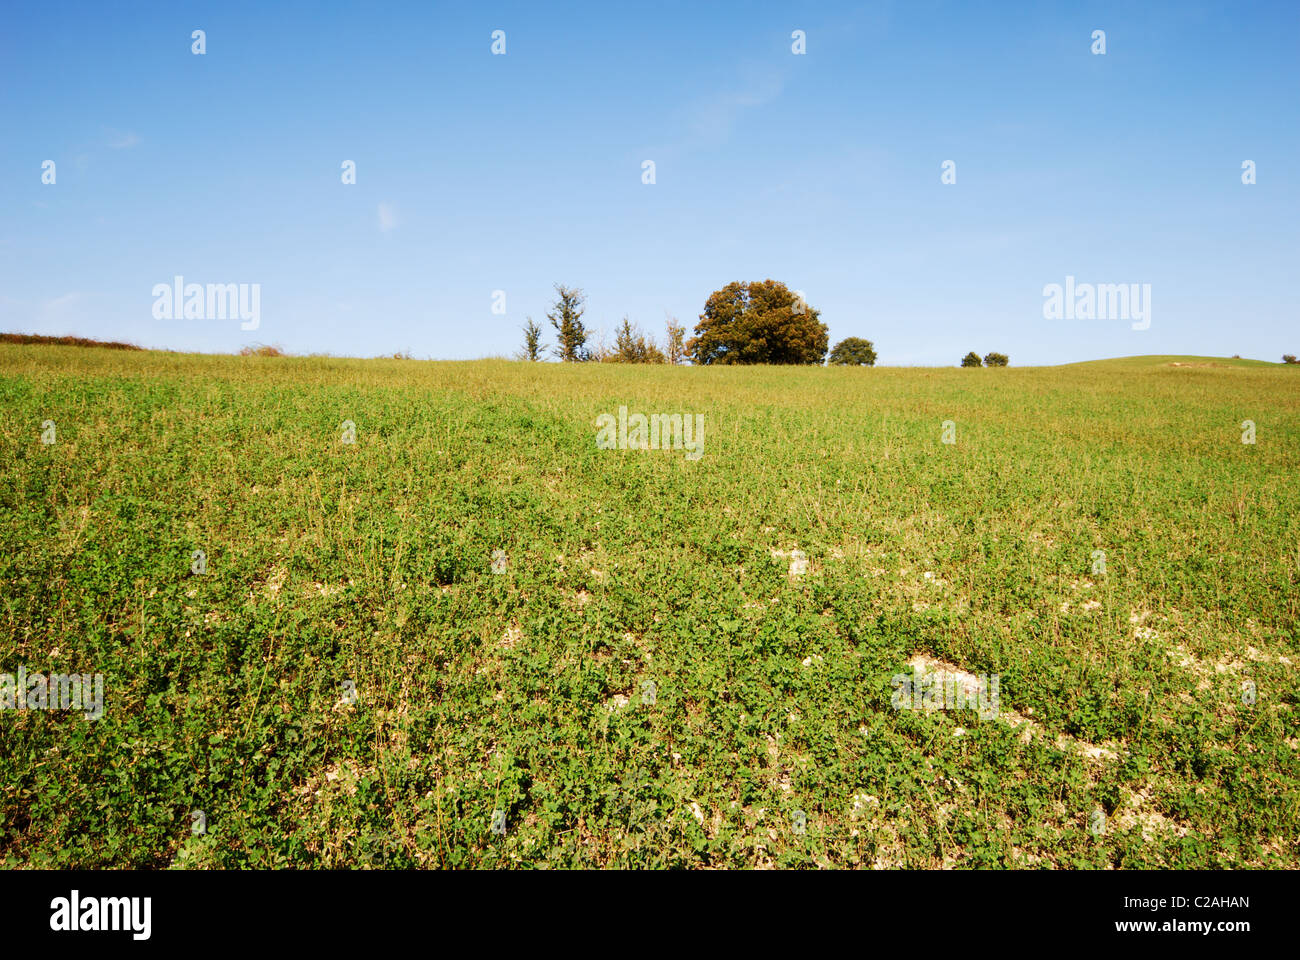 Large green cultivated field under blue sky Stock Photo